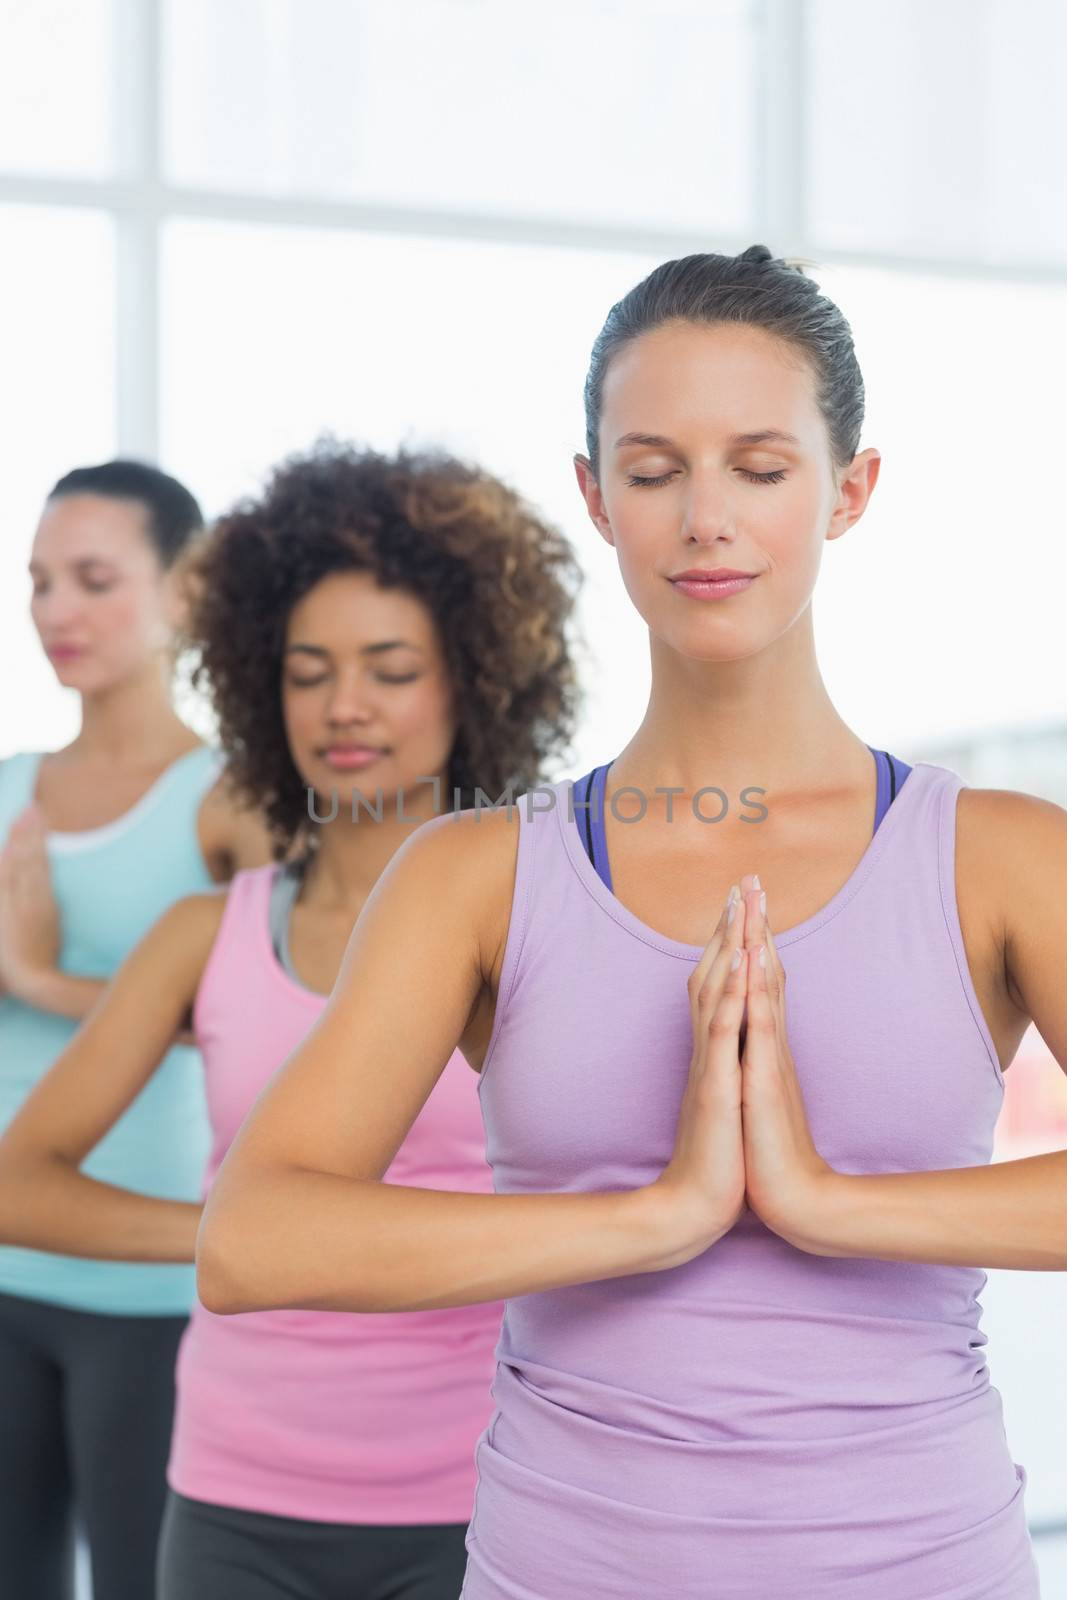 Women in meditation pose with eyes closed at fitness studio by Wavebreakmedia